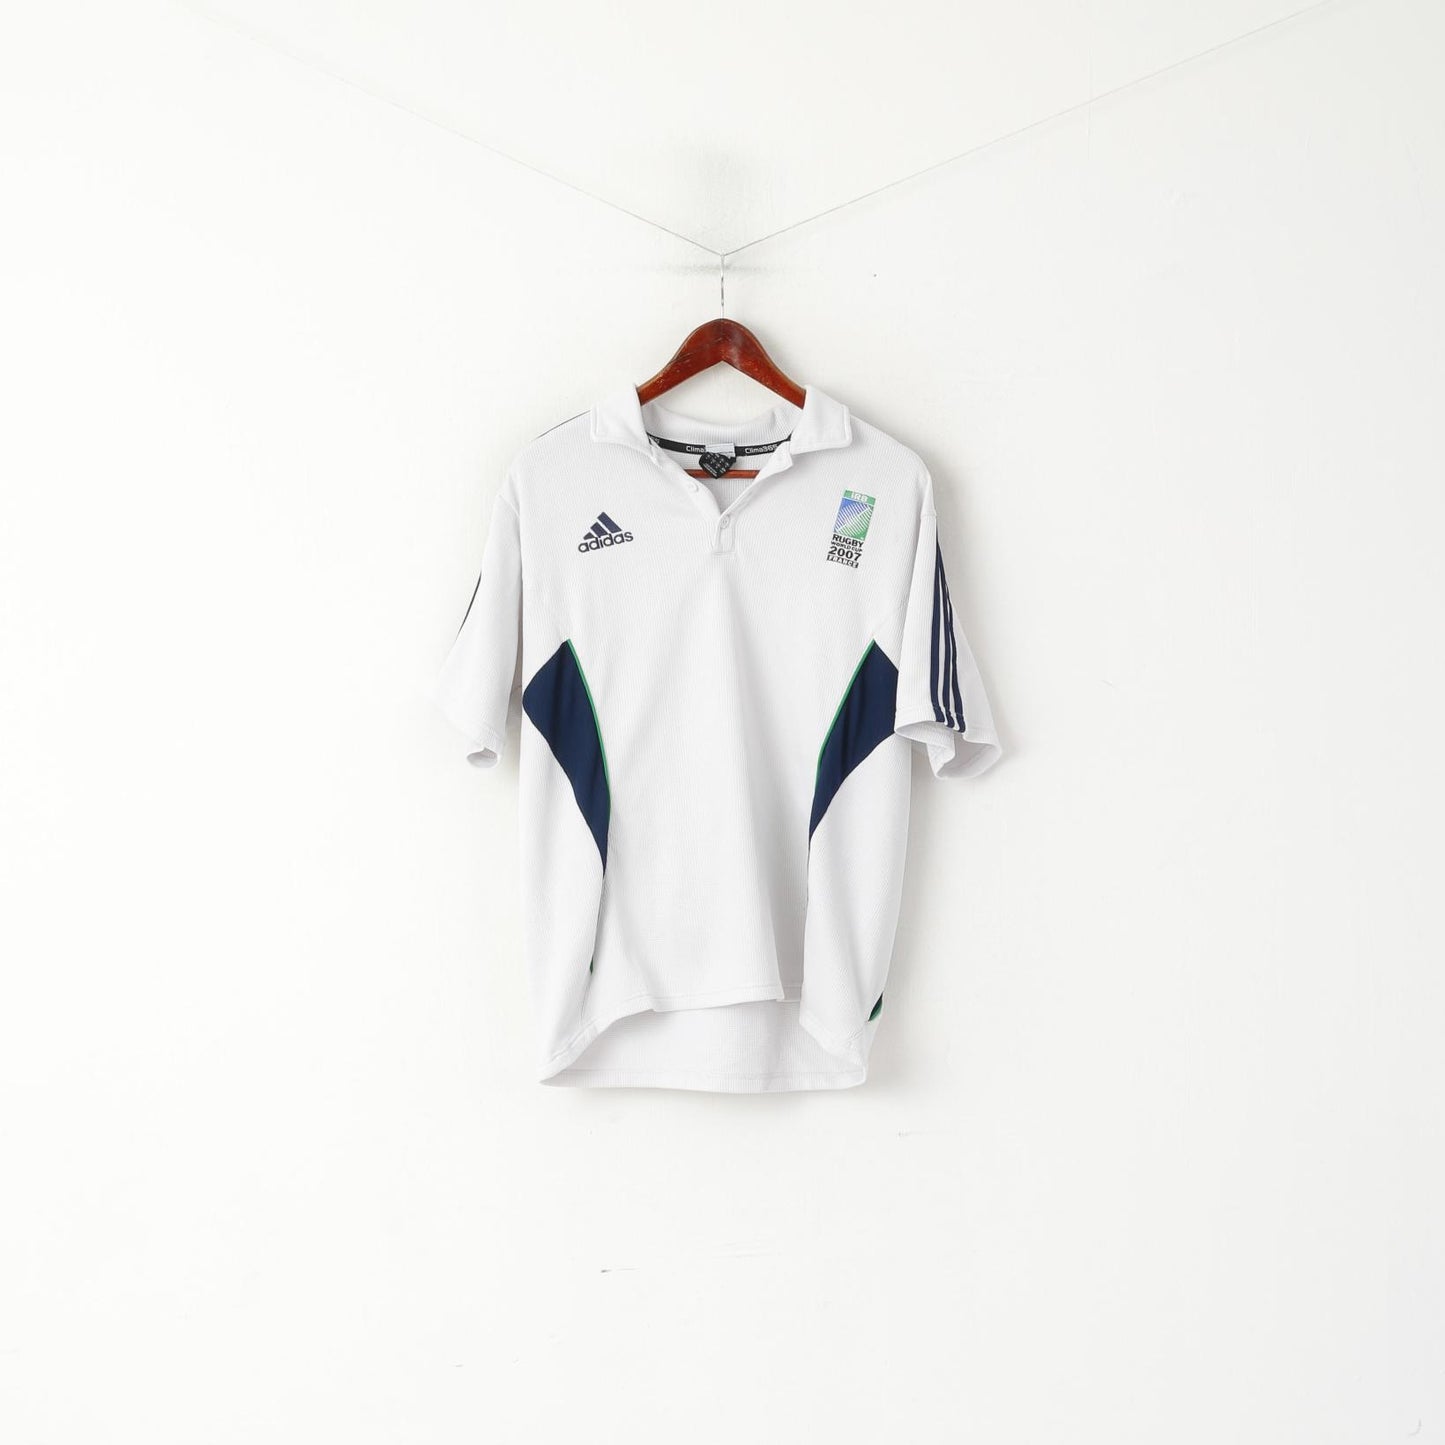 Adidas IRB Men M Polo Shirt White 2007 Rugby World Cup France Vintage Top